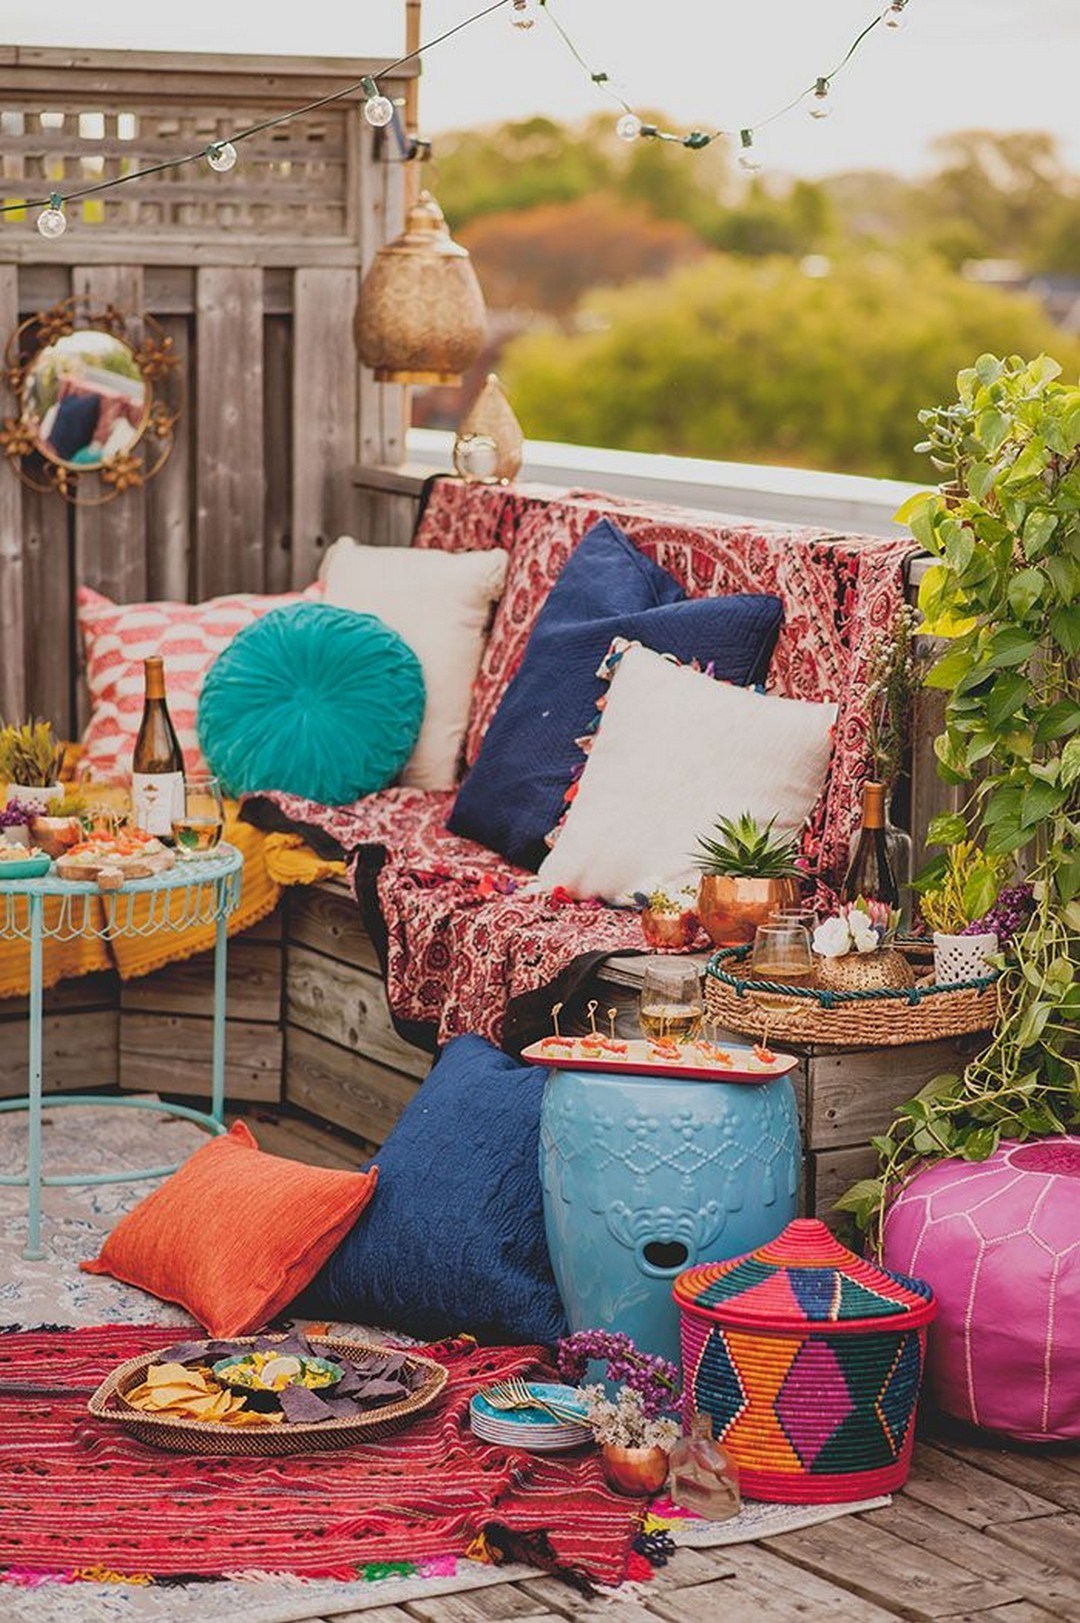 a super colorful Moroccan patio with bright pillows, blankets, rugs, baskets and ottomans plus a mirror and lights